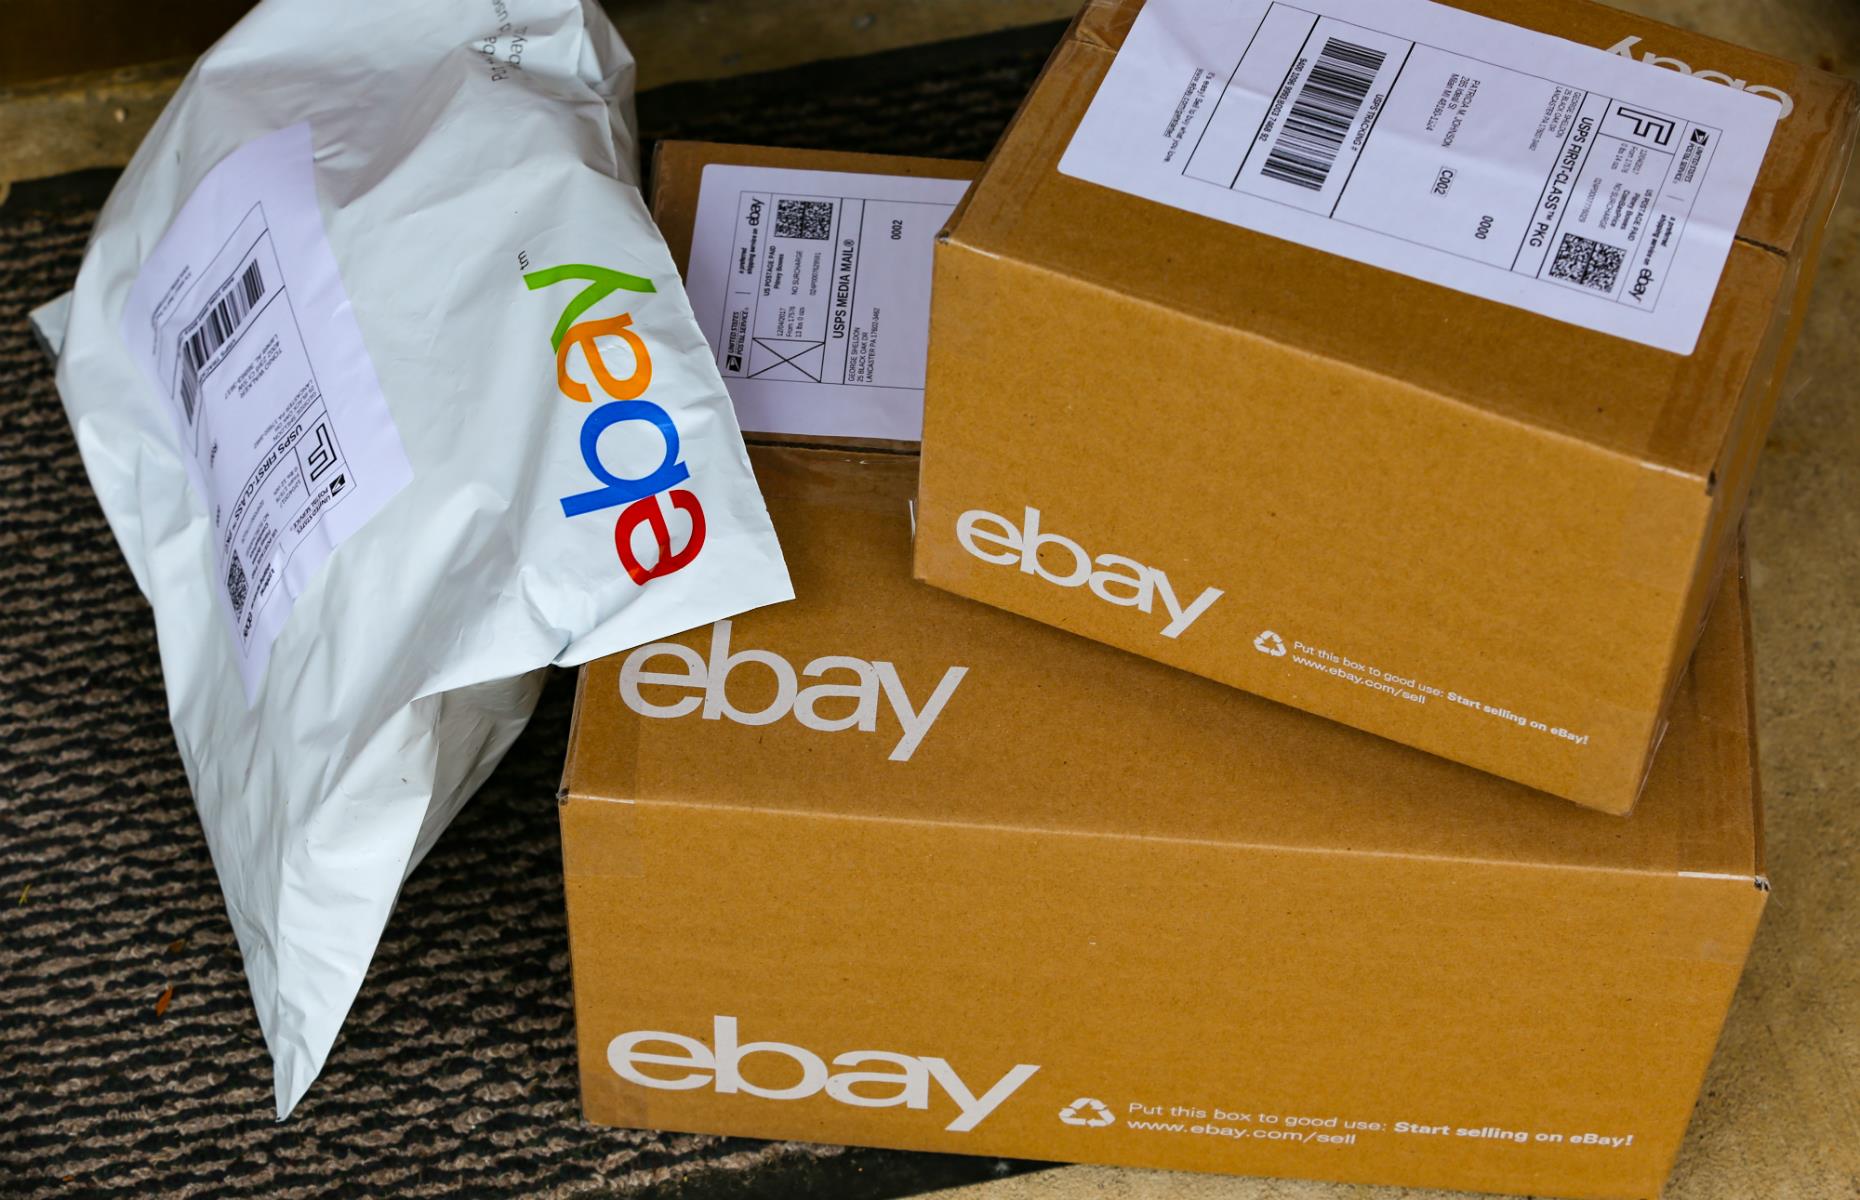 They return or list unwanted Christmas gifts on eBay...